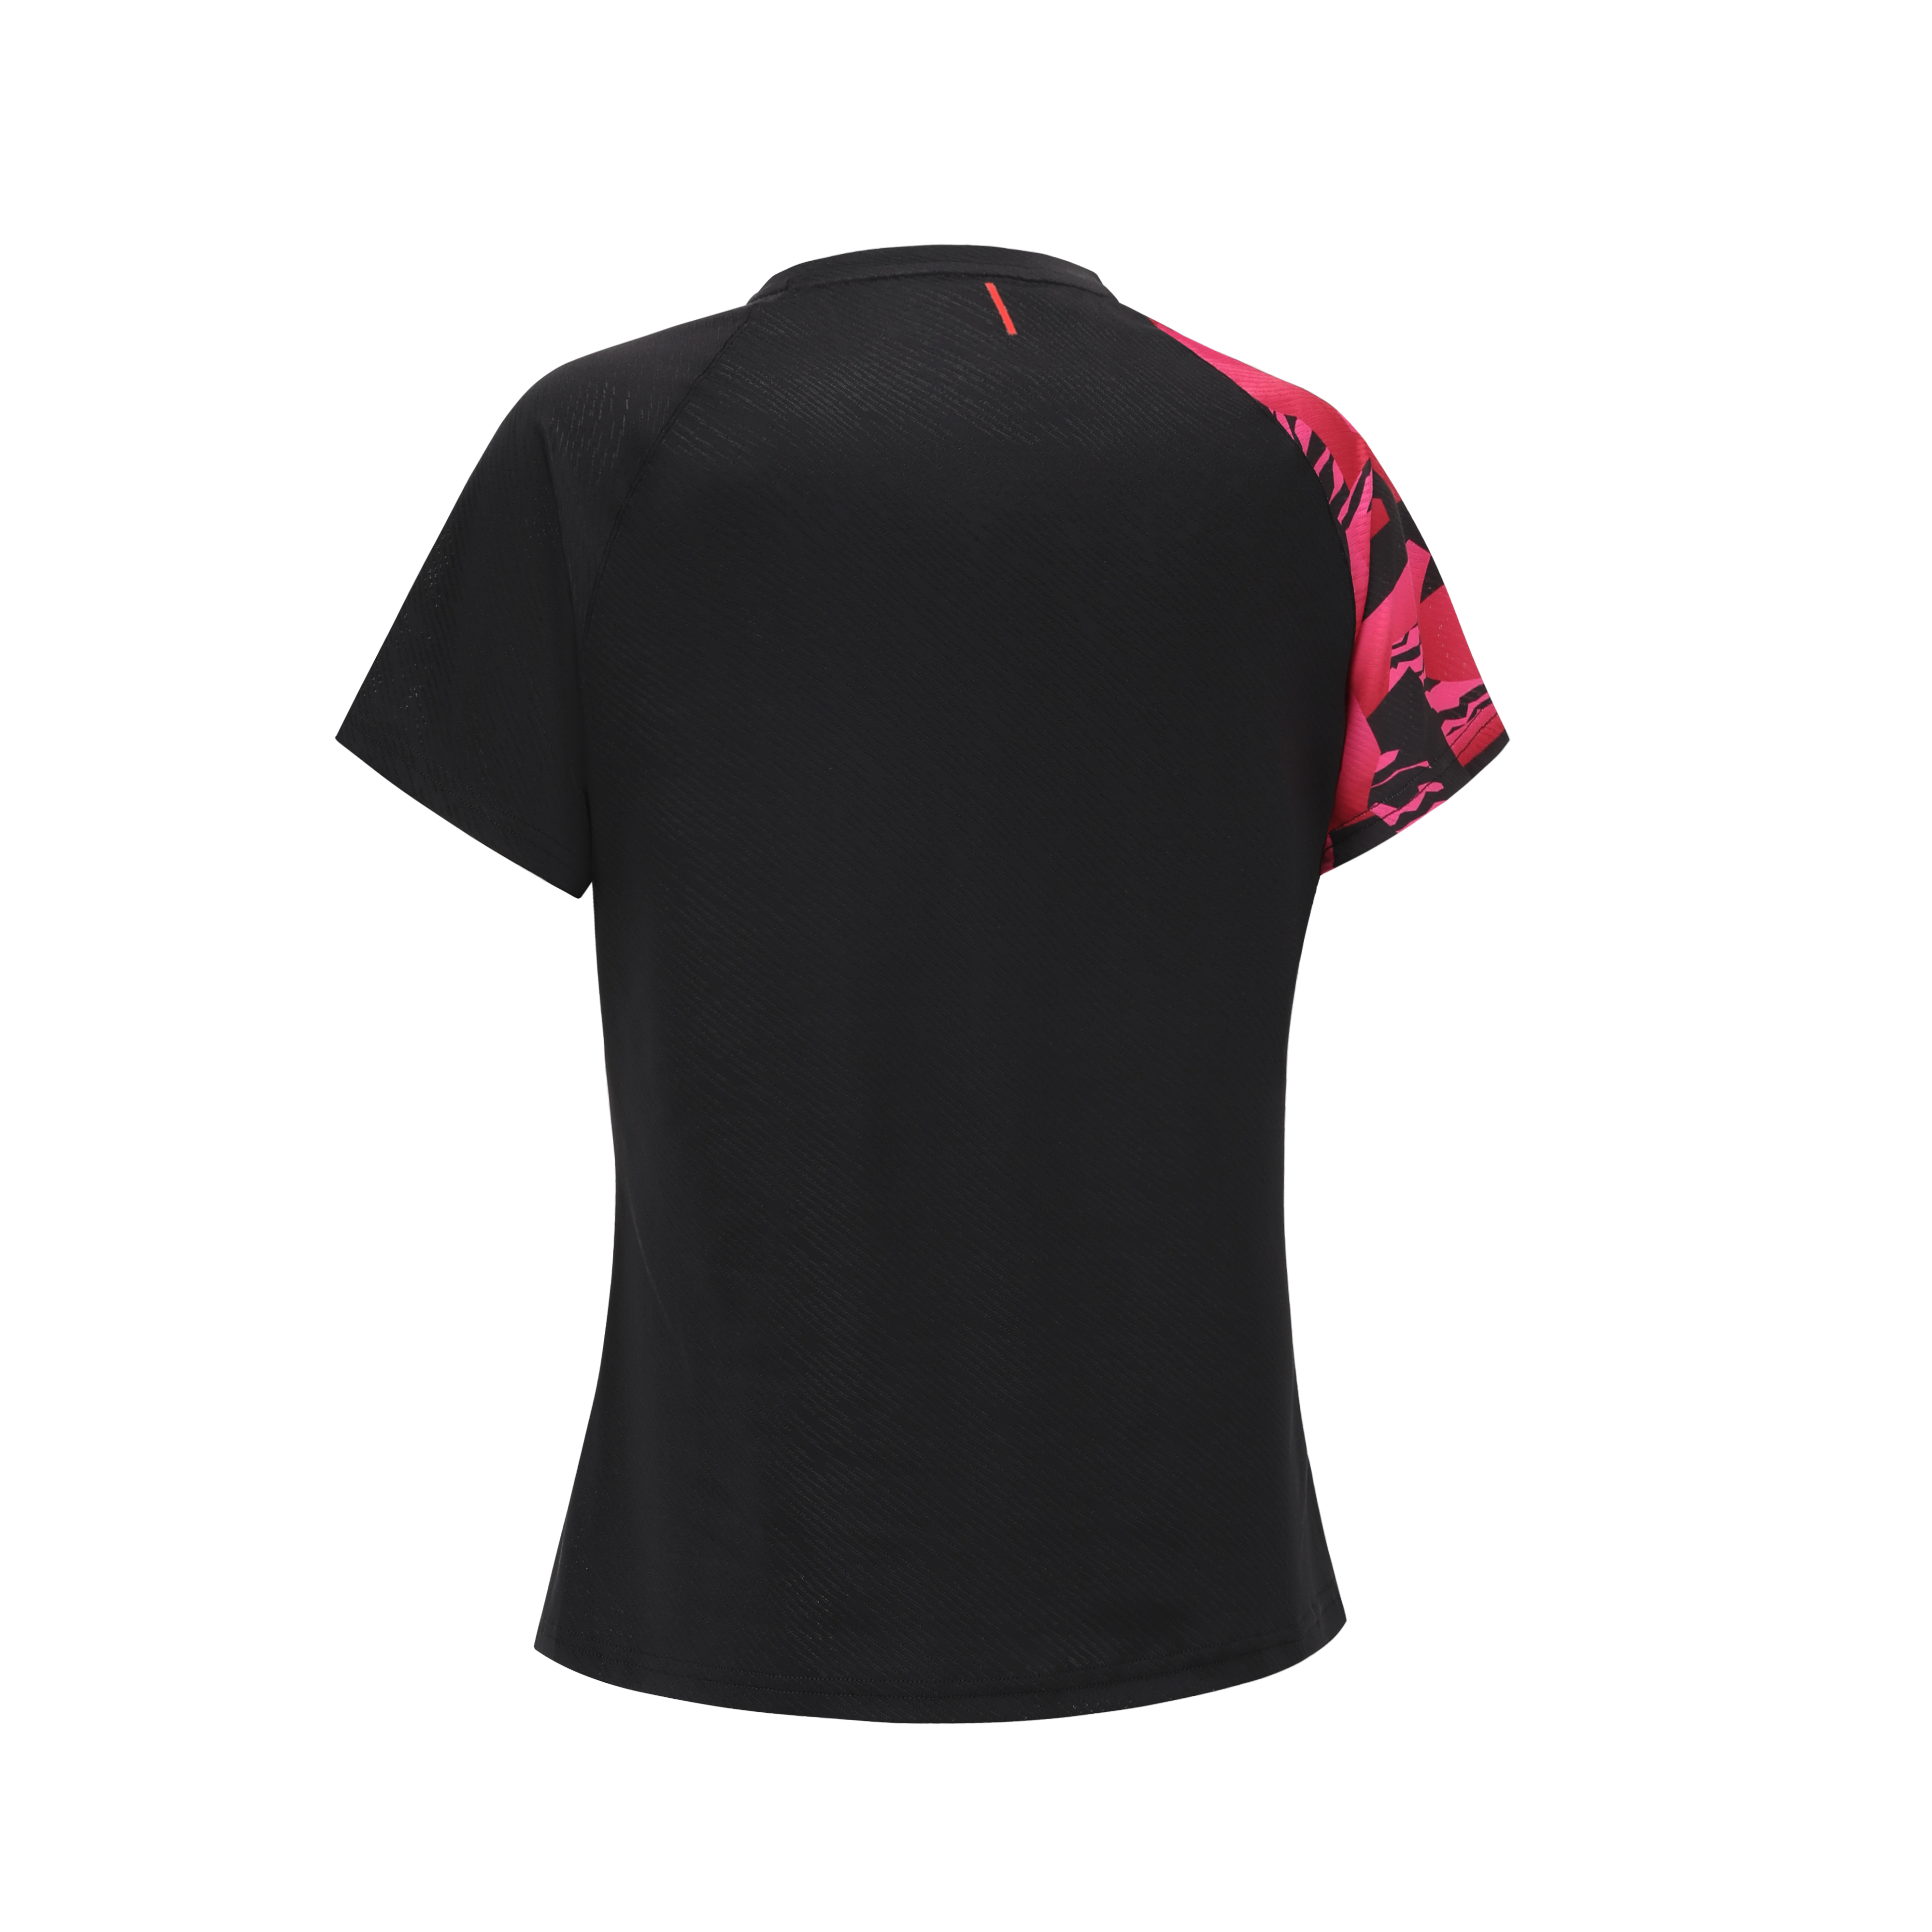 PERFLY  T-shirt manches courtes - 560 